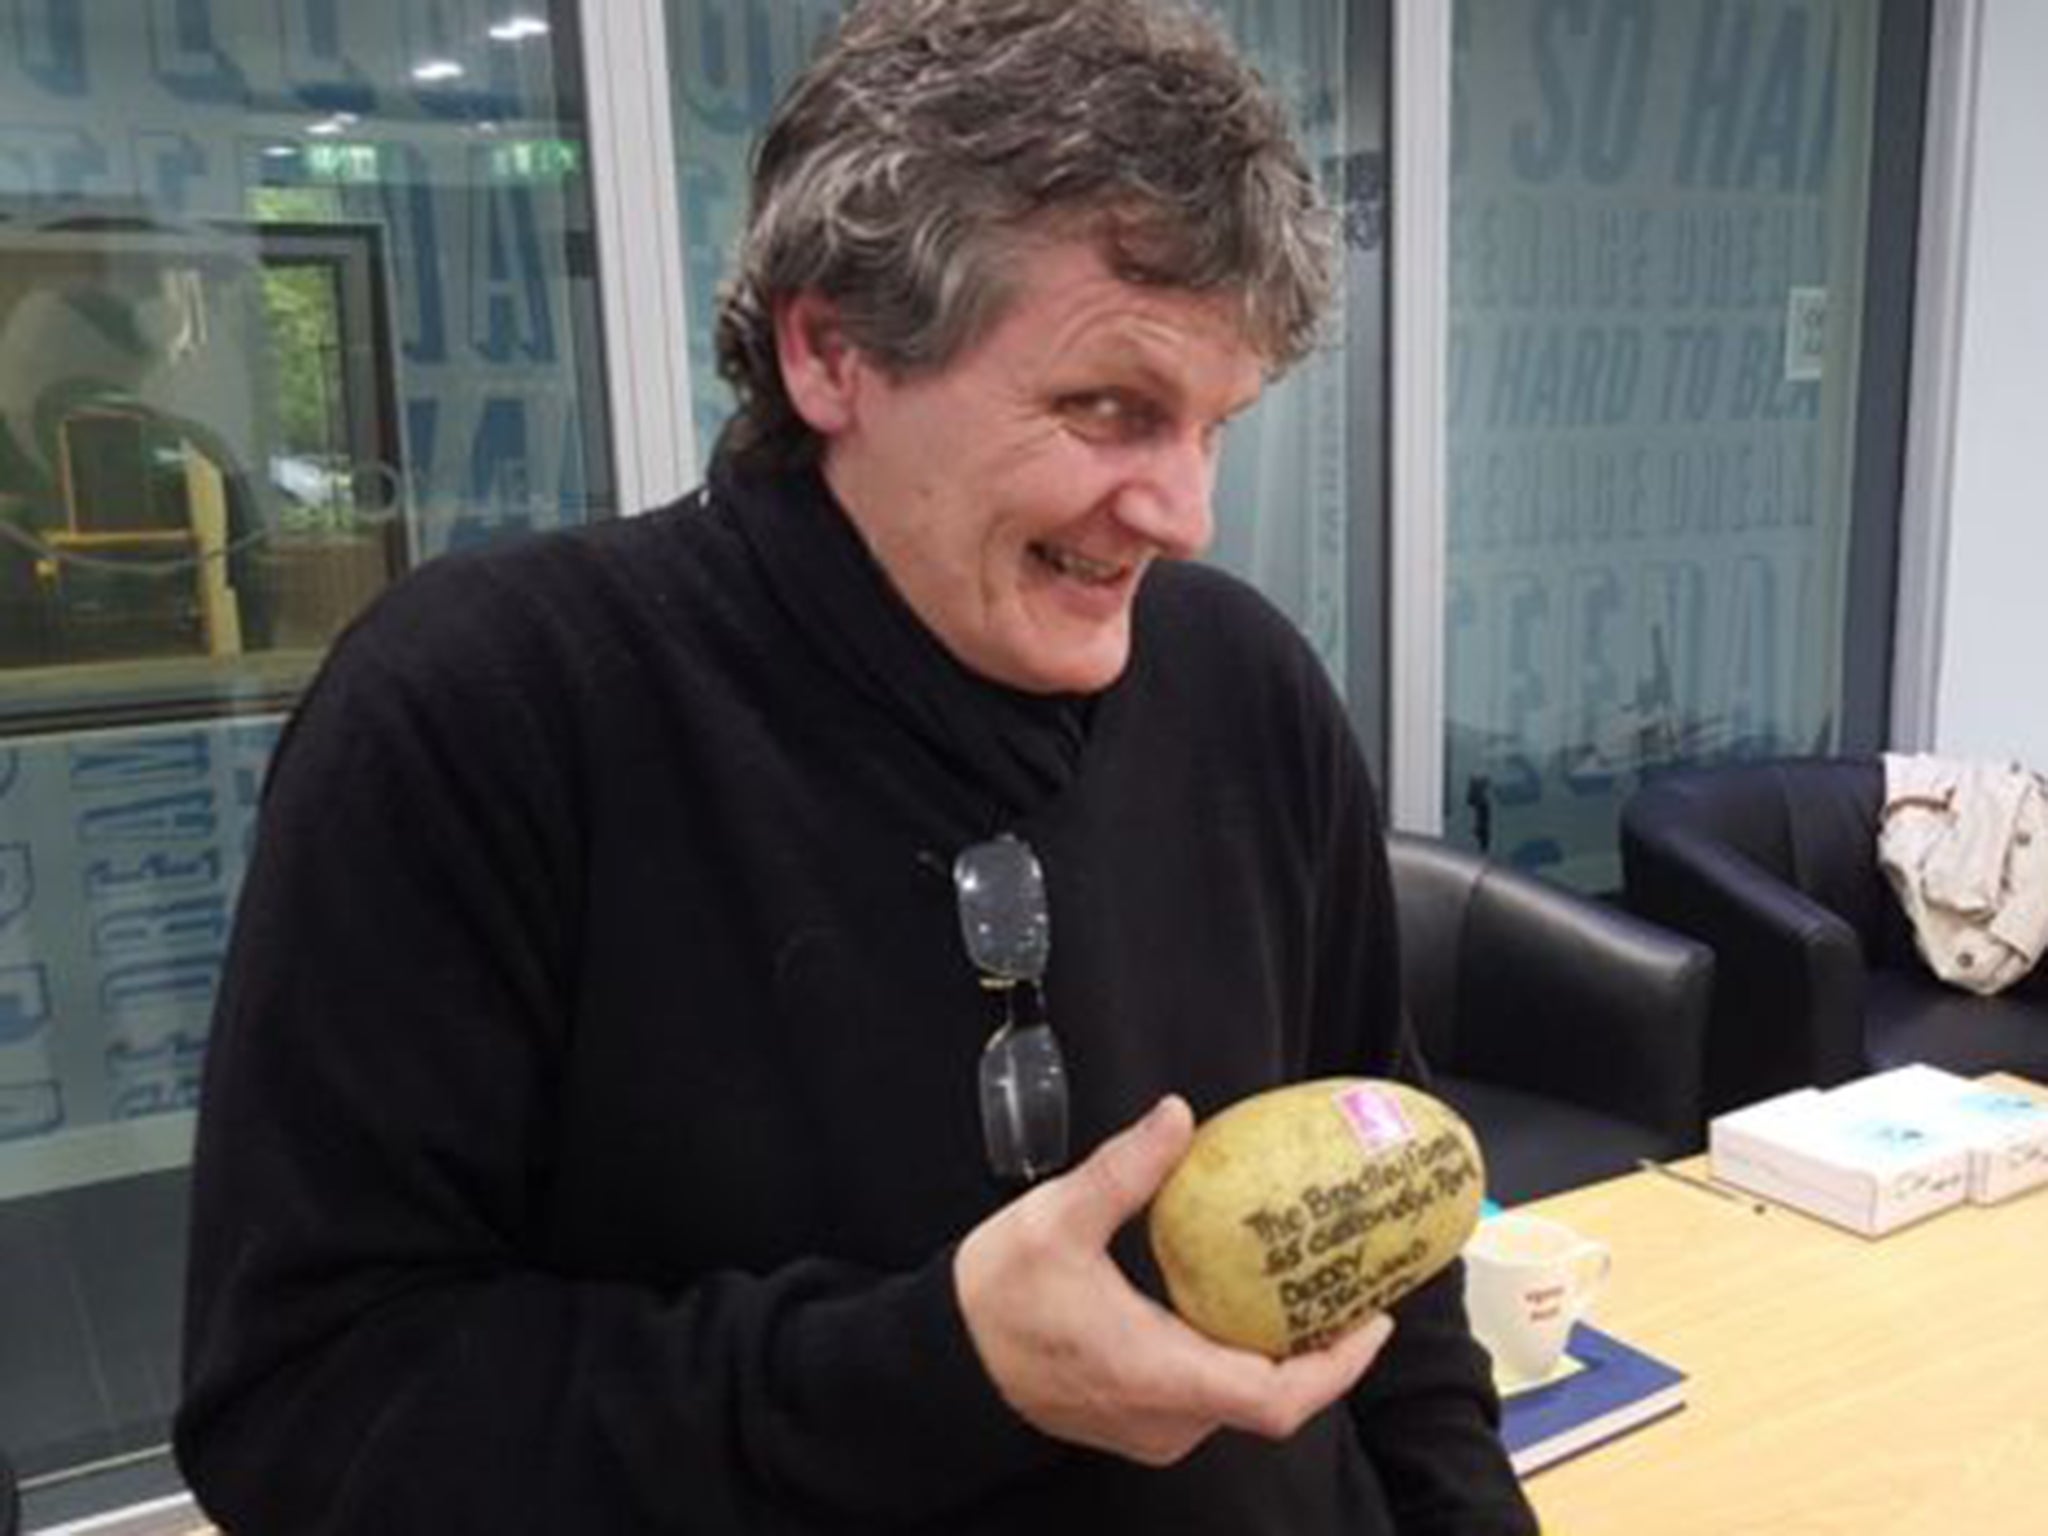 Dermot Bradley was delighted with the Maris Piper potato posted from Birmingham to Northern Ireland